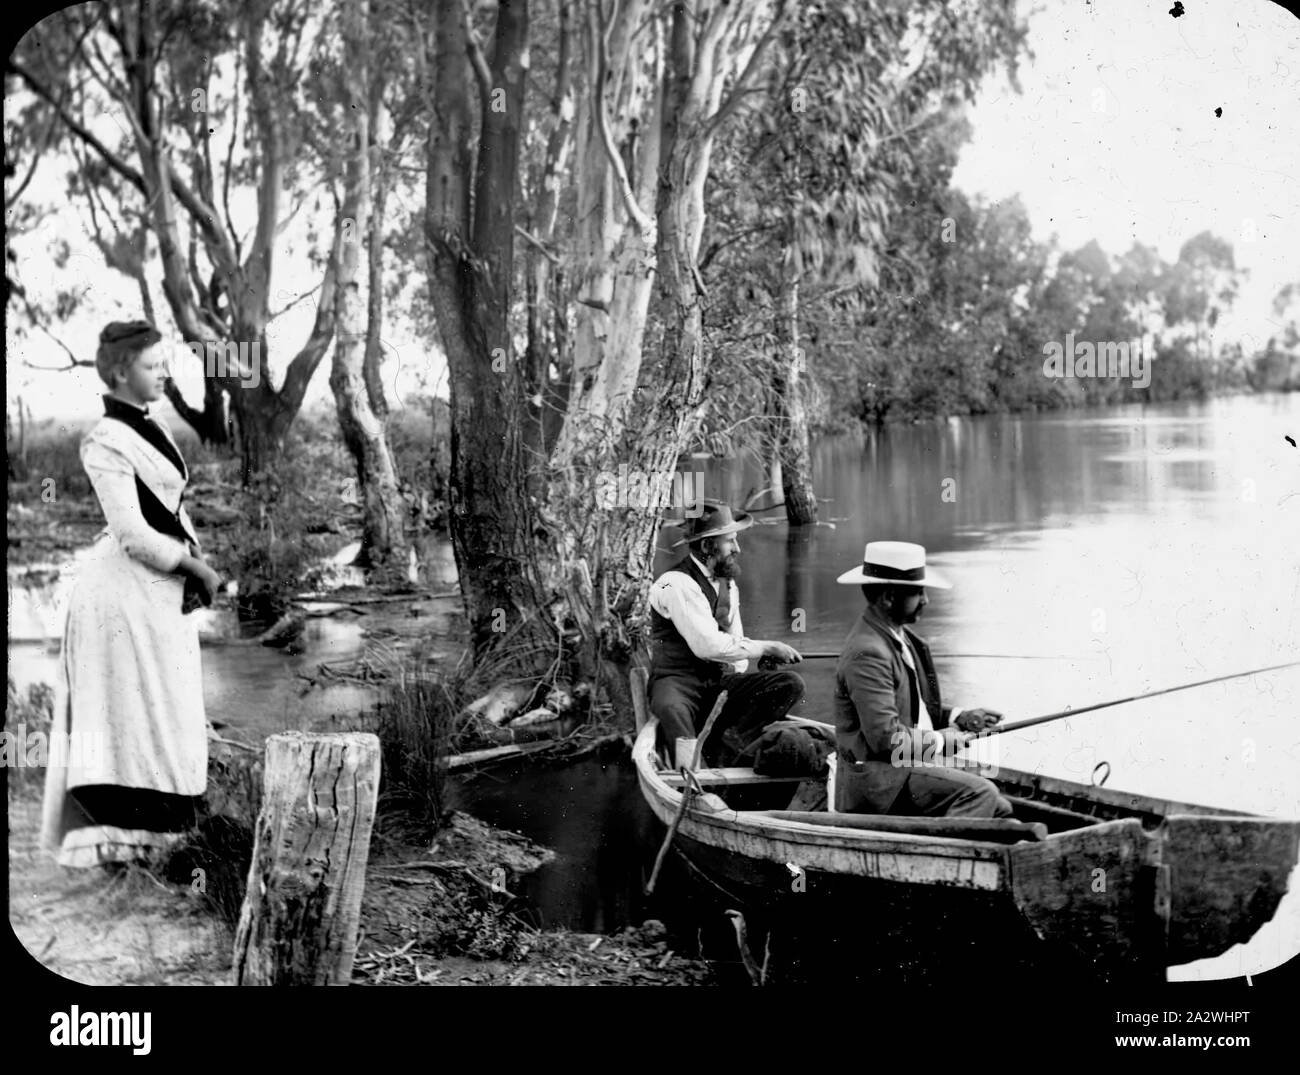 Lantern Slide - Fishing in River, Victoria, Australia, about 1890, Black and white image of A.J. Campbell sitting in a boat, without a jacket on, while he and a friend were fishing, possibly in the Yarra River, with a lady standing on the bank looking on. This is one of many glass lantern slides that form the A.J. Campbell Collection held by Museums Victoria Stock Photo